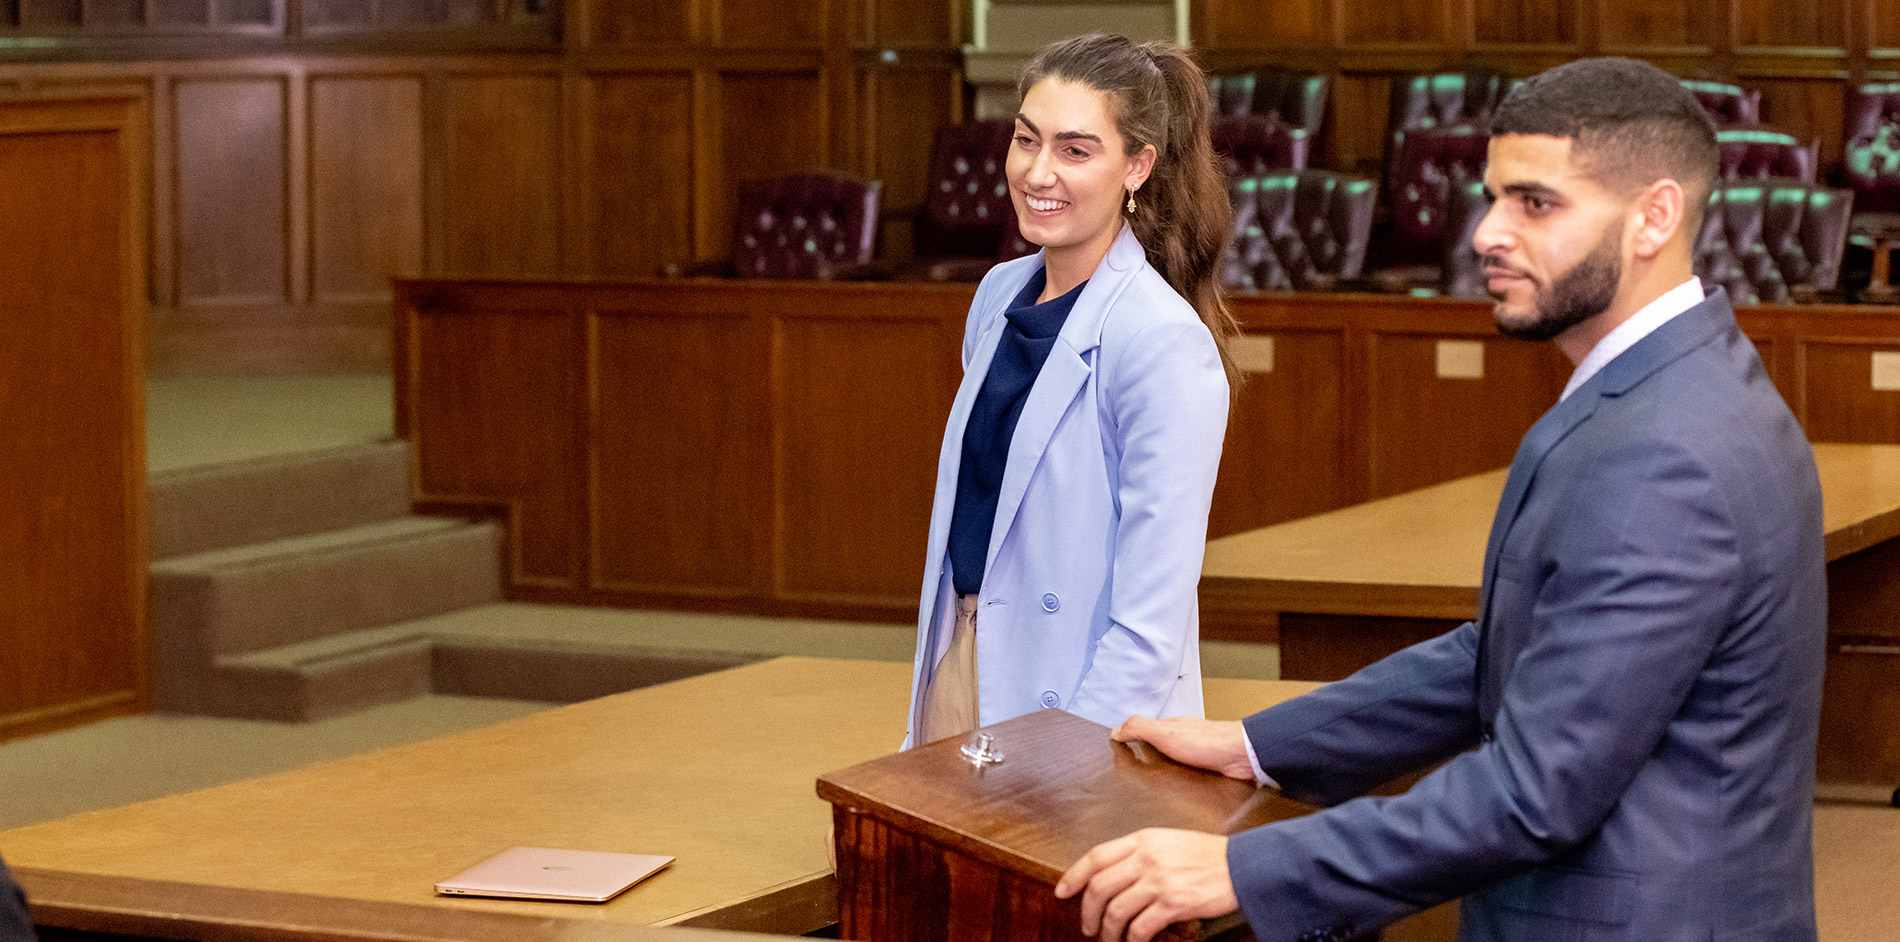 Two students discussion a case in the Moot Courtroom